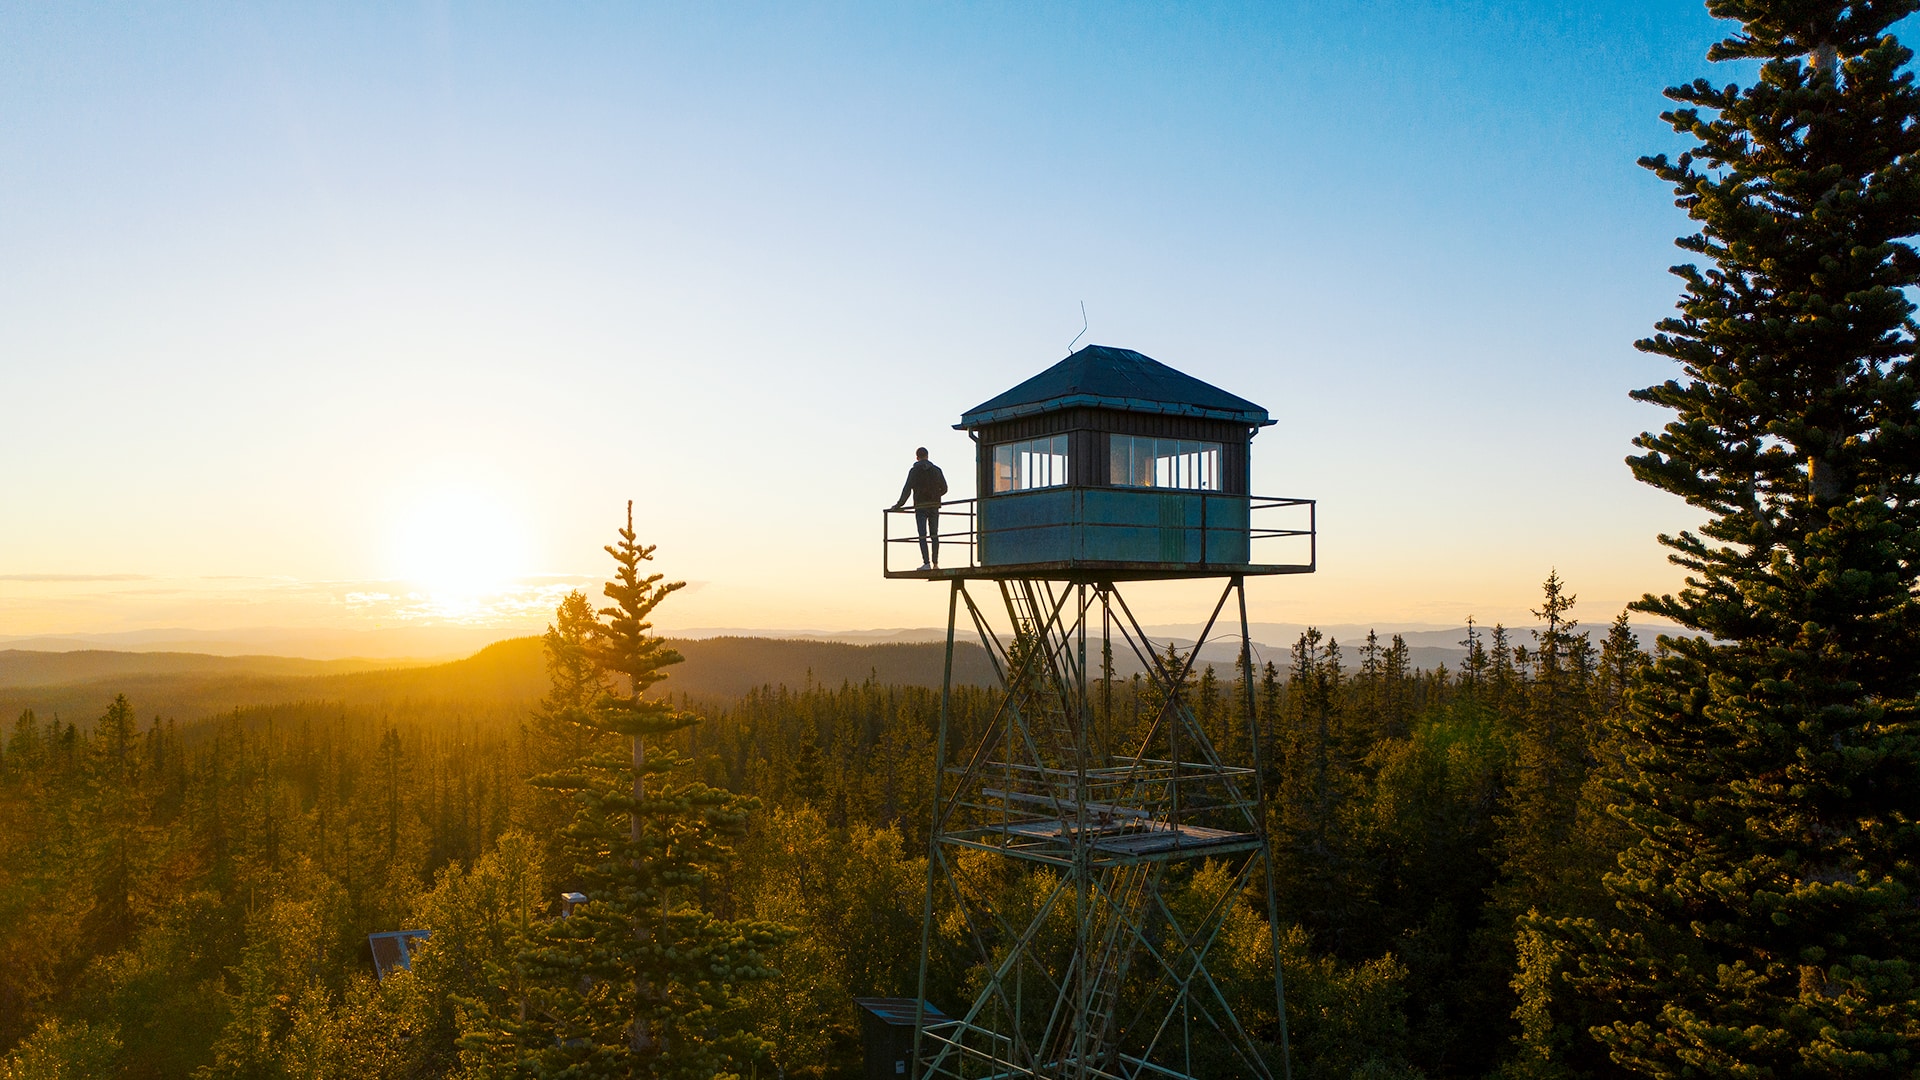 A person enjoying the view from a watchtower in a forrest at sunset with mountains in the distance.